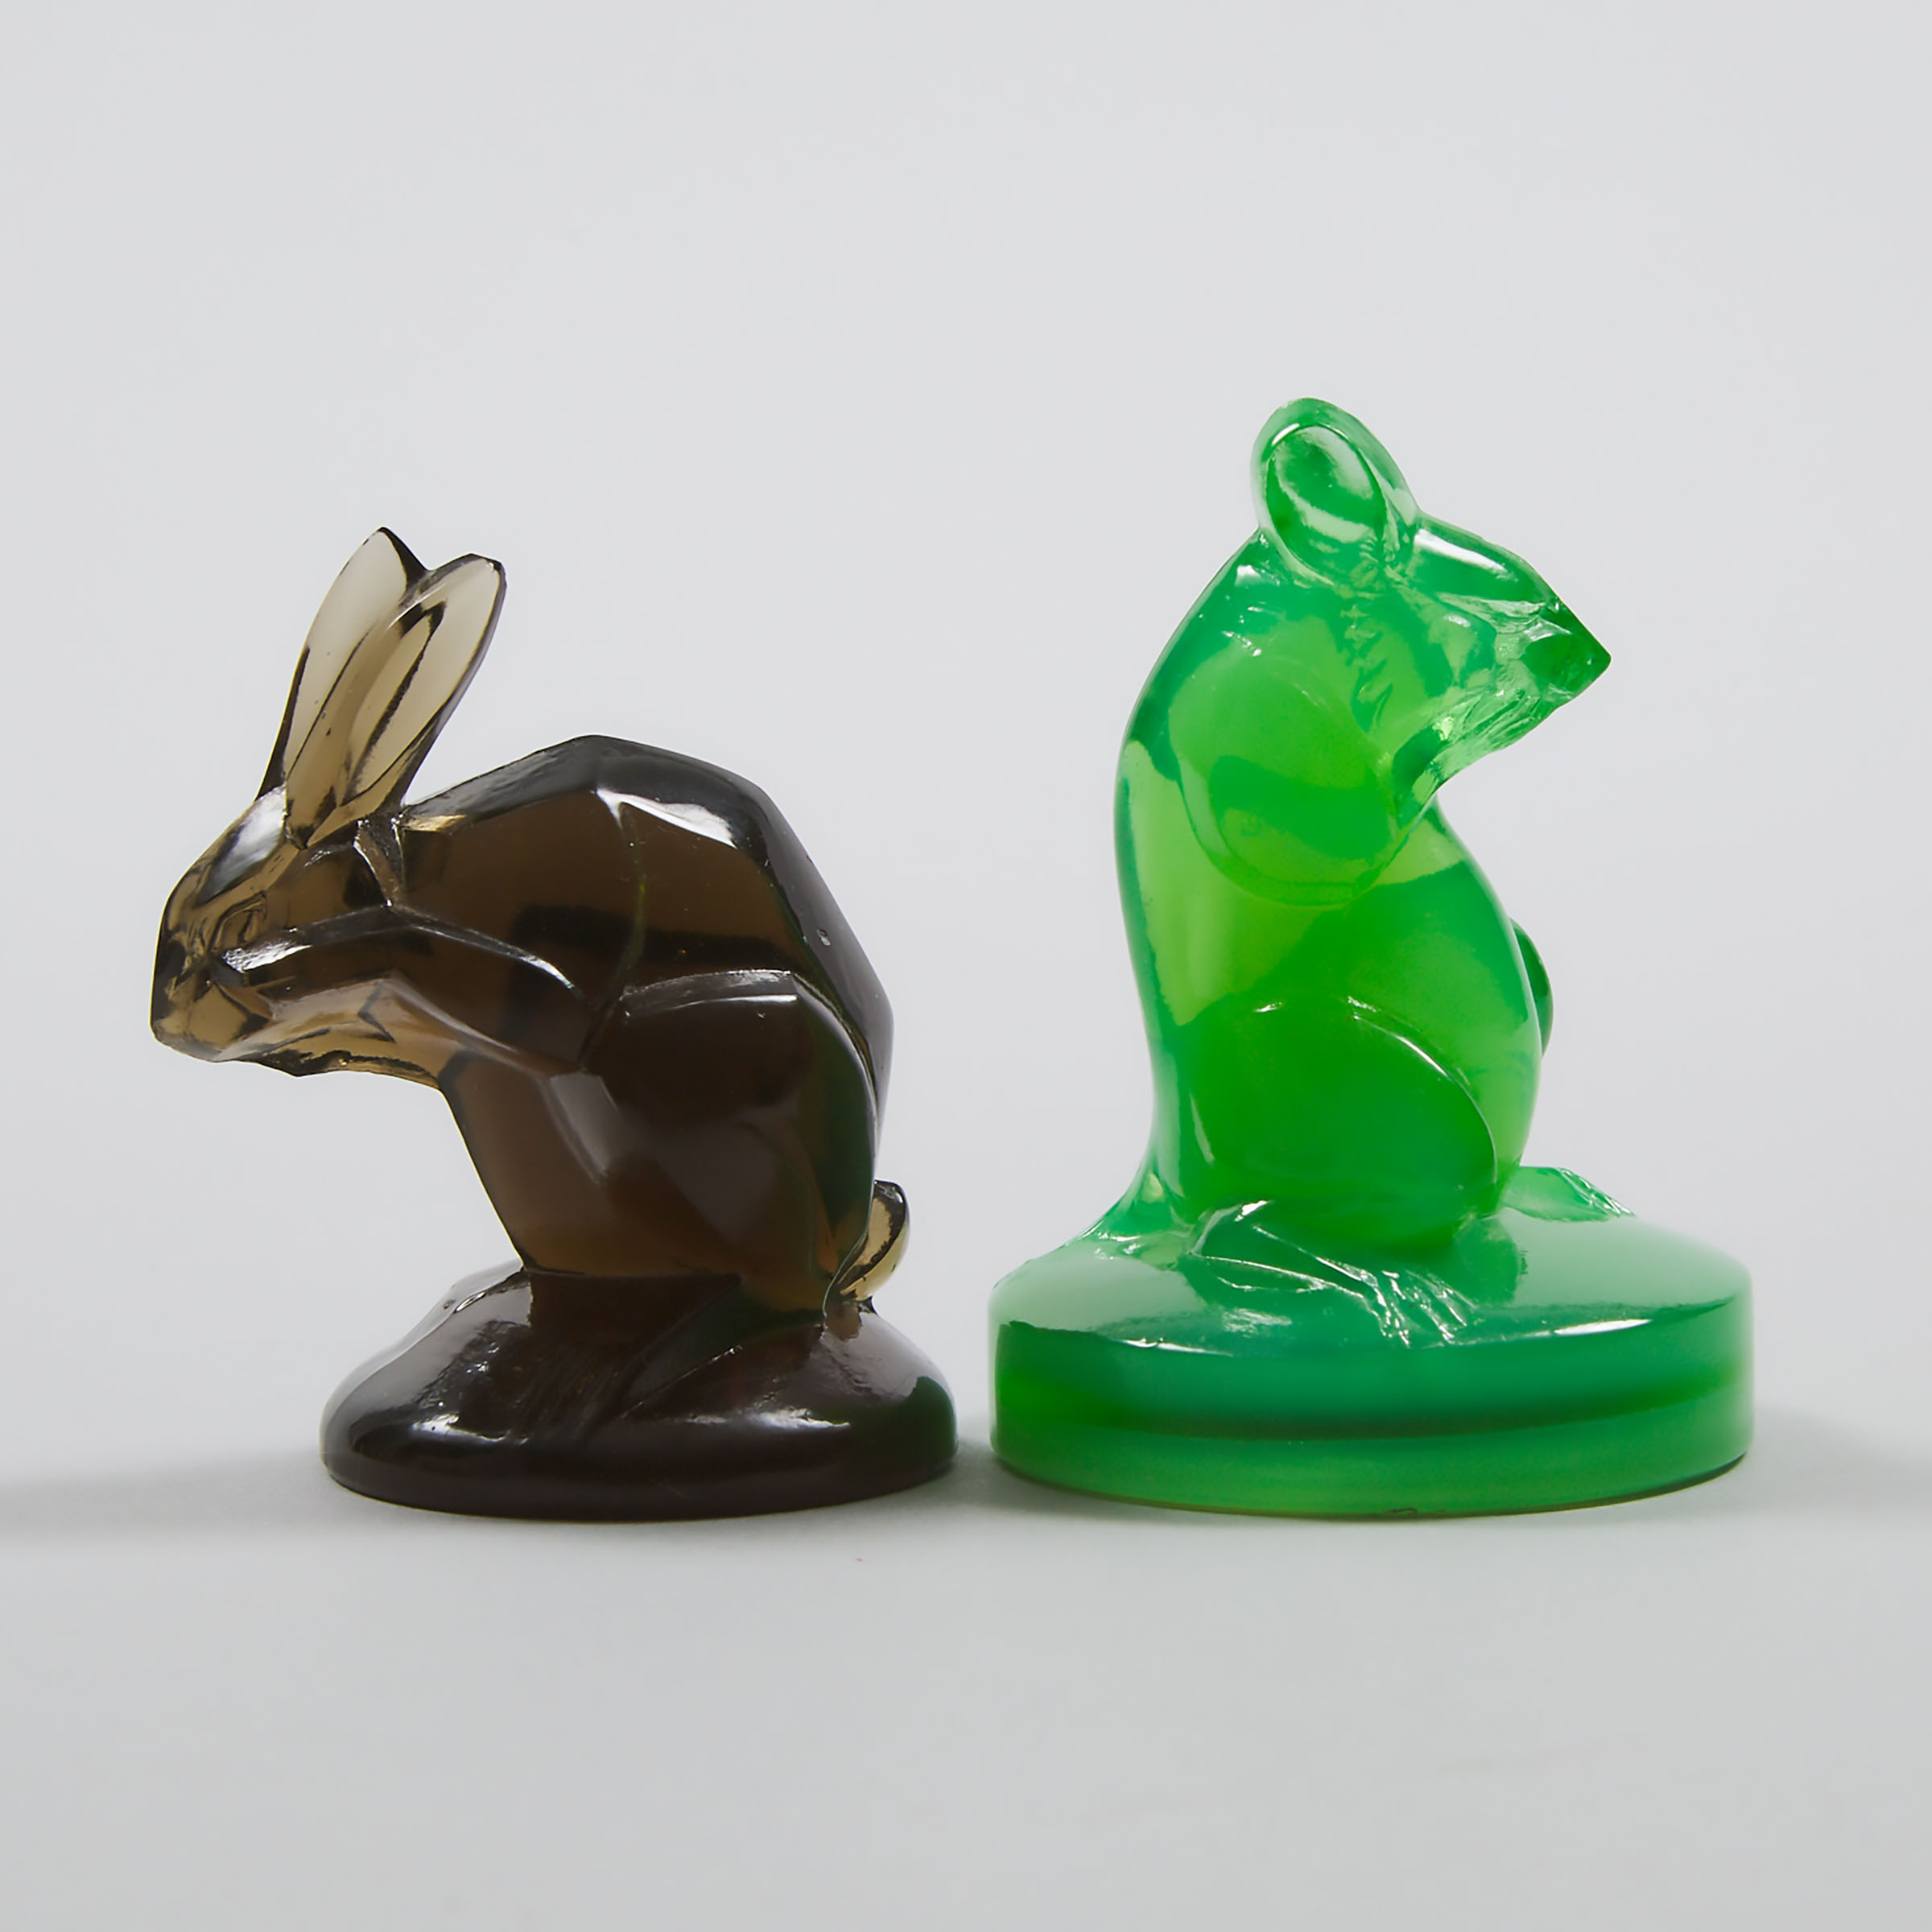 'Lapin' and 'Souris', Lalique Moulded Amber and Green Glass Cachets, c.1930